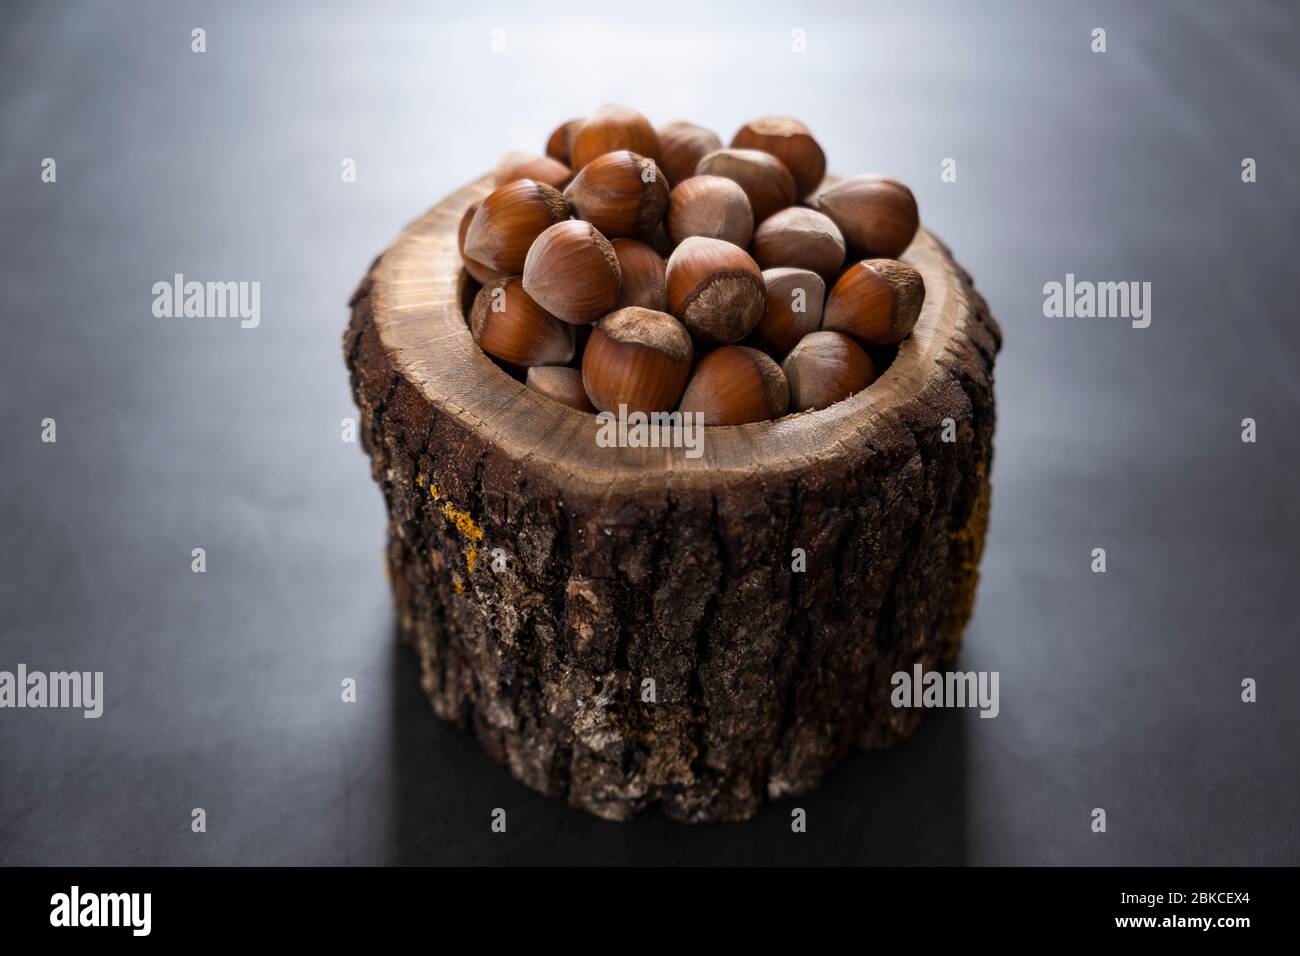 Hazelnuts in wooden and rustic bowl. Raw and tasty nuts for snacks. Healthy, unroasted and delicious food. Stock Photo